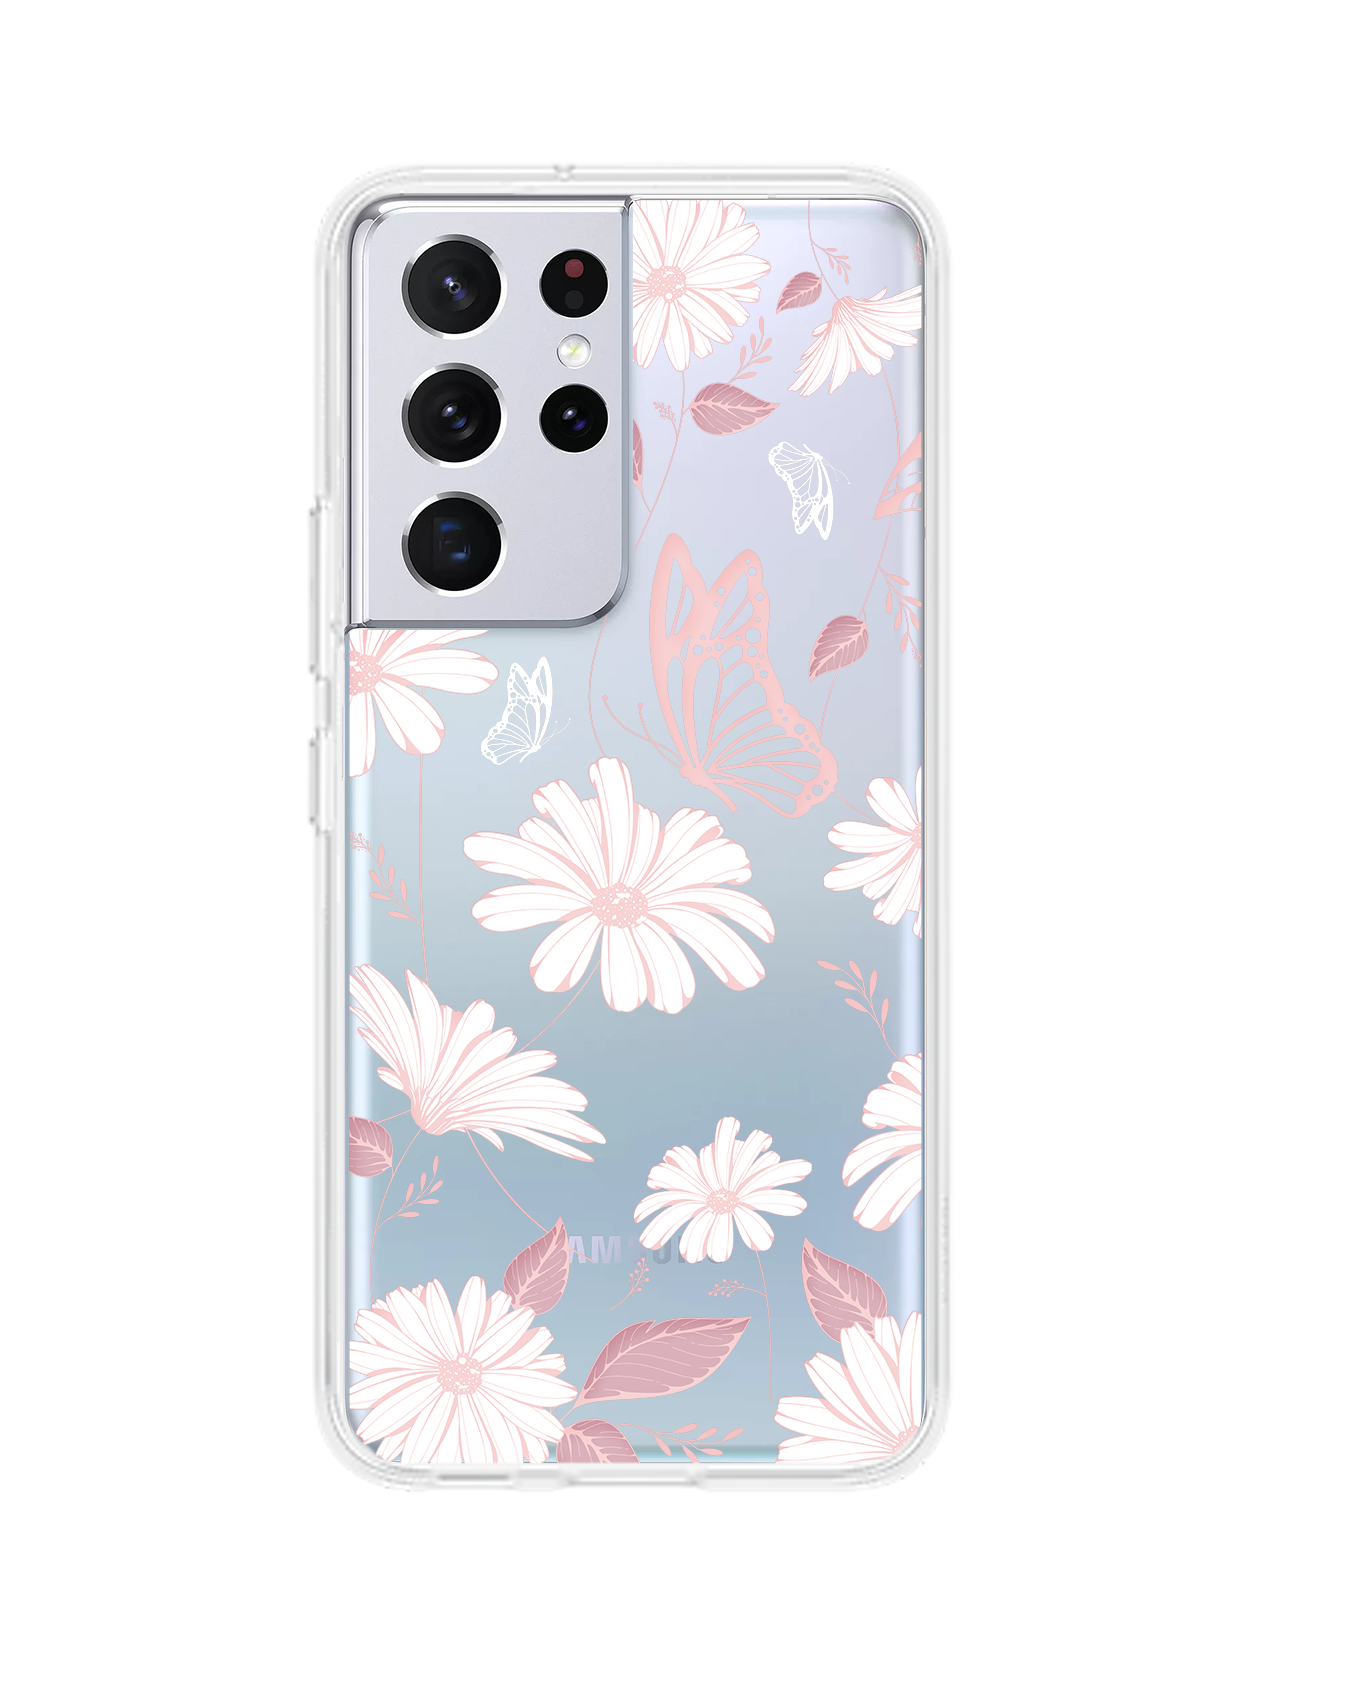 Android Rearguard Hybrid Case - Butterfly & Daisy